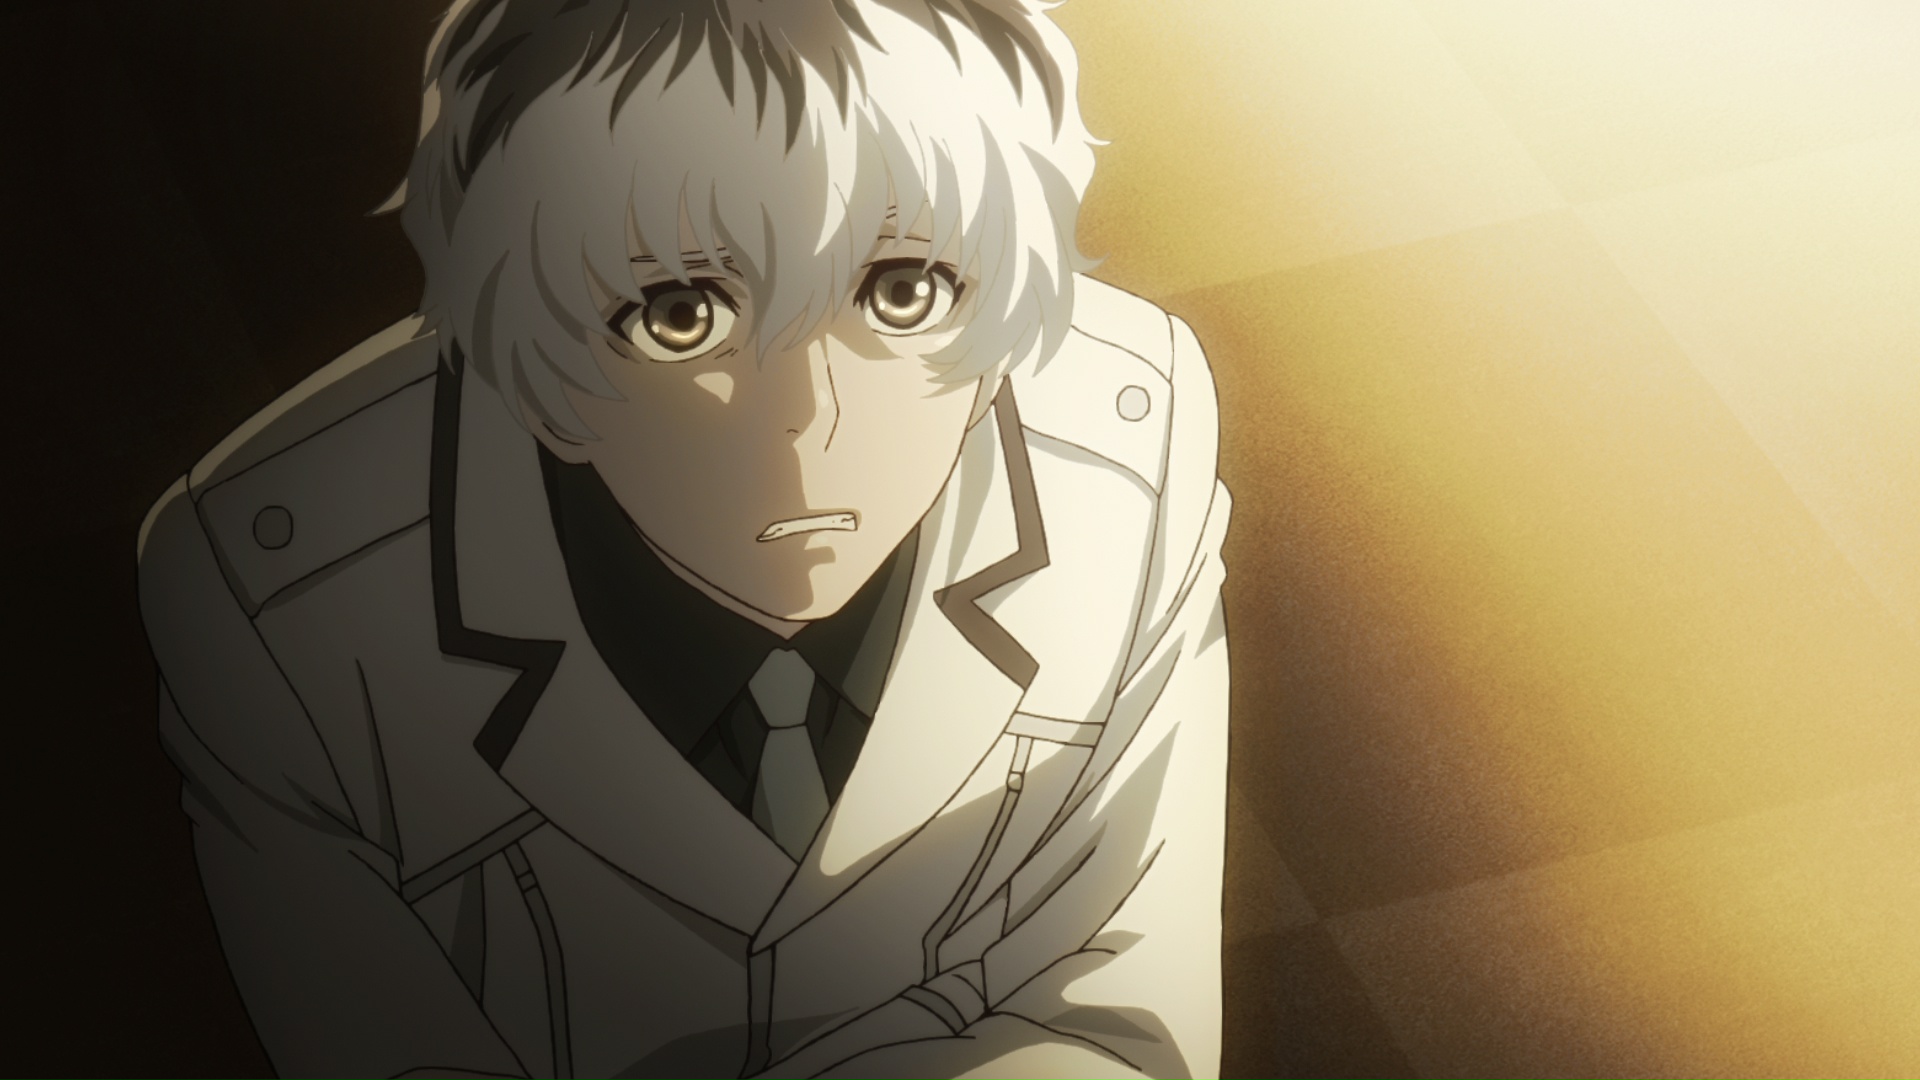 amanda aarts recommends tokyo ghoul season 1 episode 1 pic